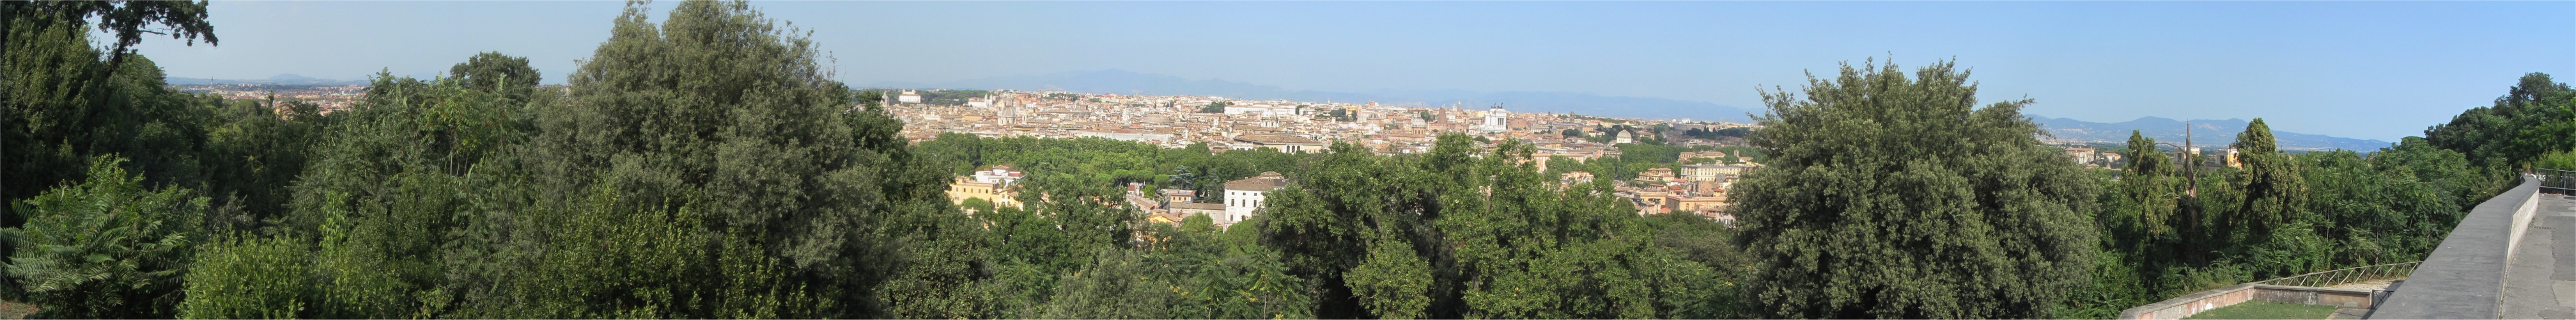 view_from_janiculum_hill